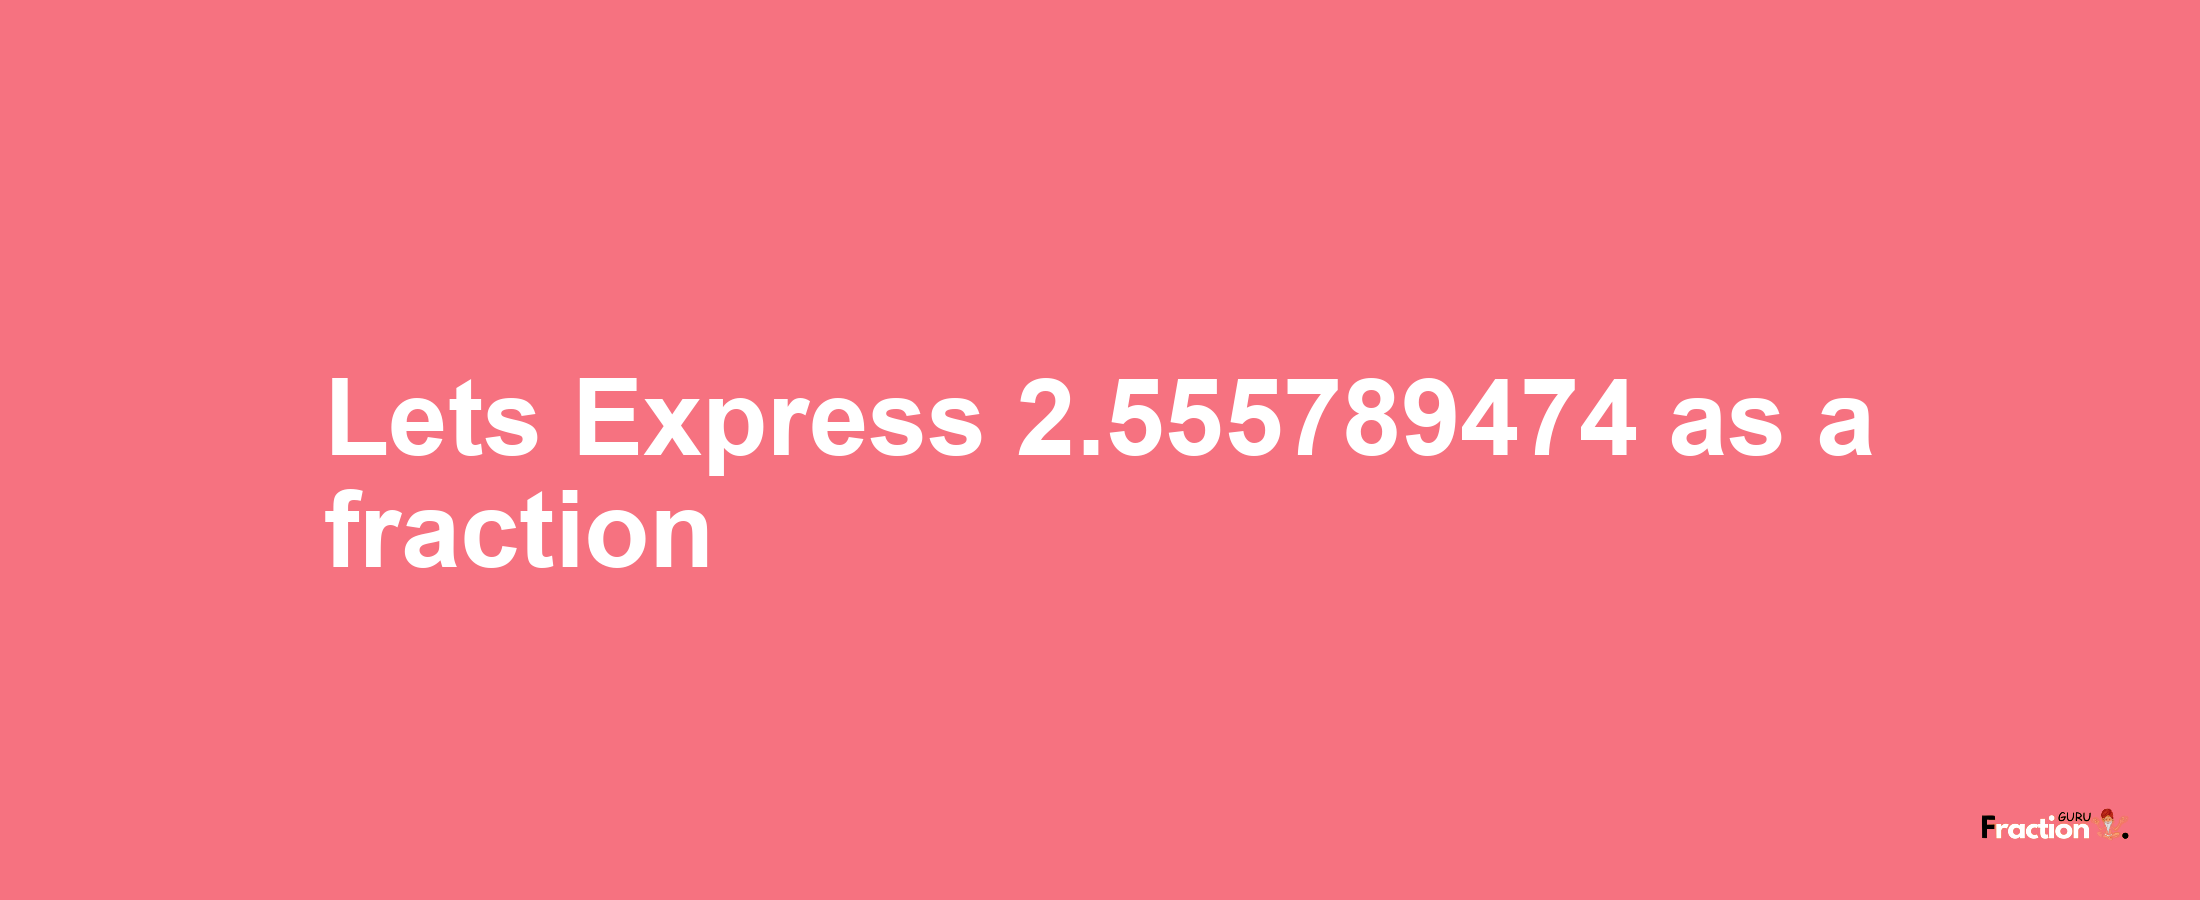 Lets Express 2.555789474 as afraction